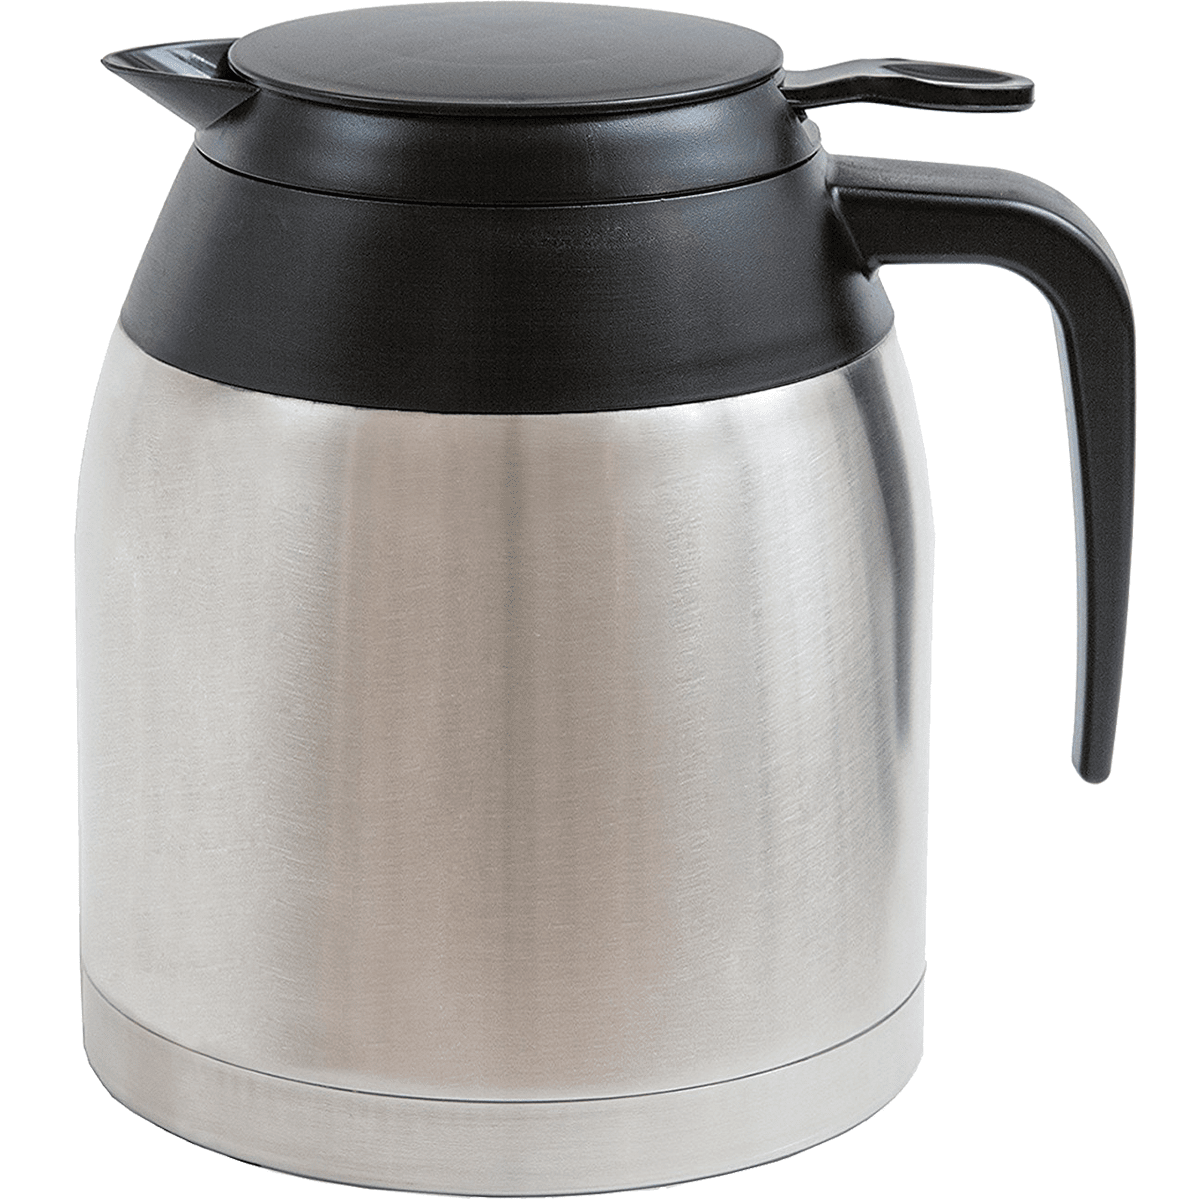 Bonavita Double Walled Stainless Steel Thermal Carafe and Lid (53070)